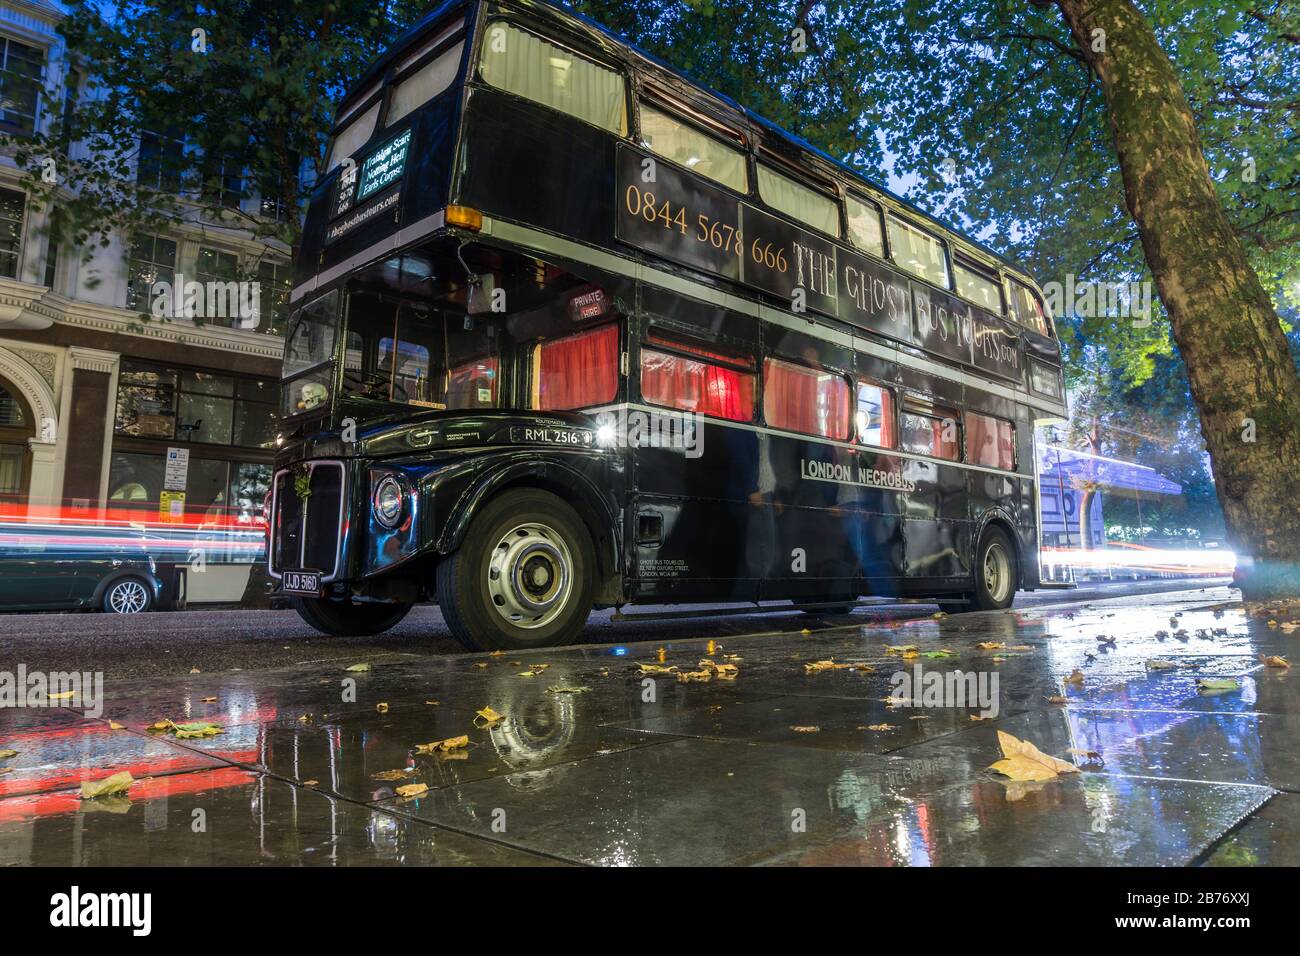 A black Routemaster double decker bus of The Ghost Tours company parked on a London street on a rainy evening Stock Photo